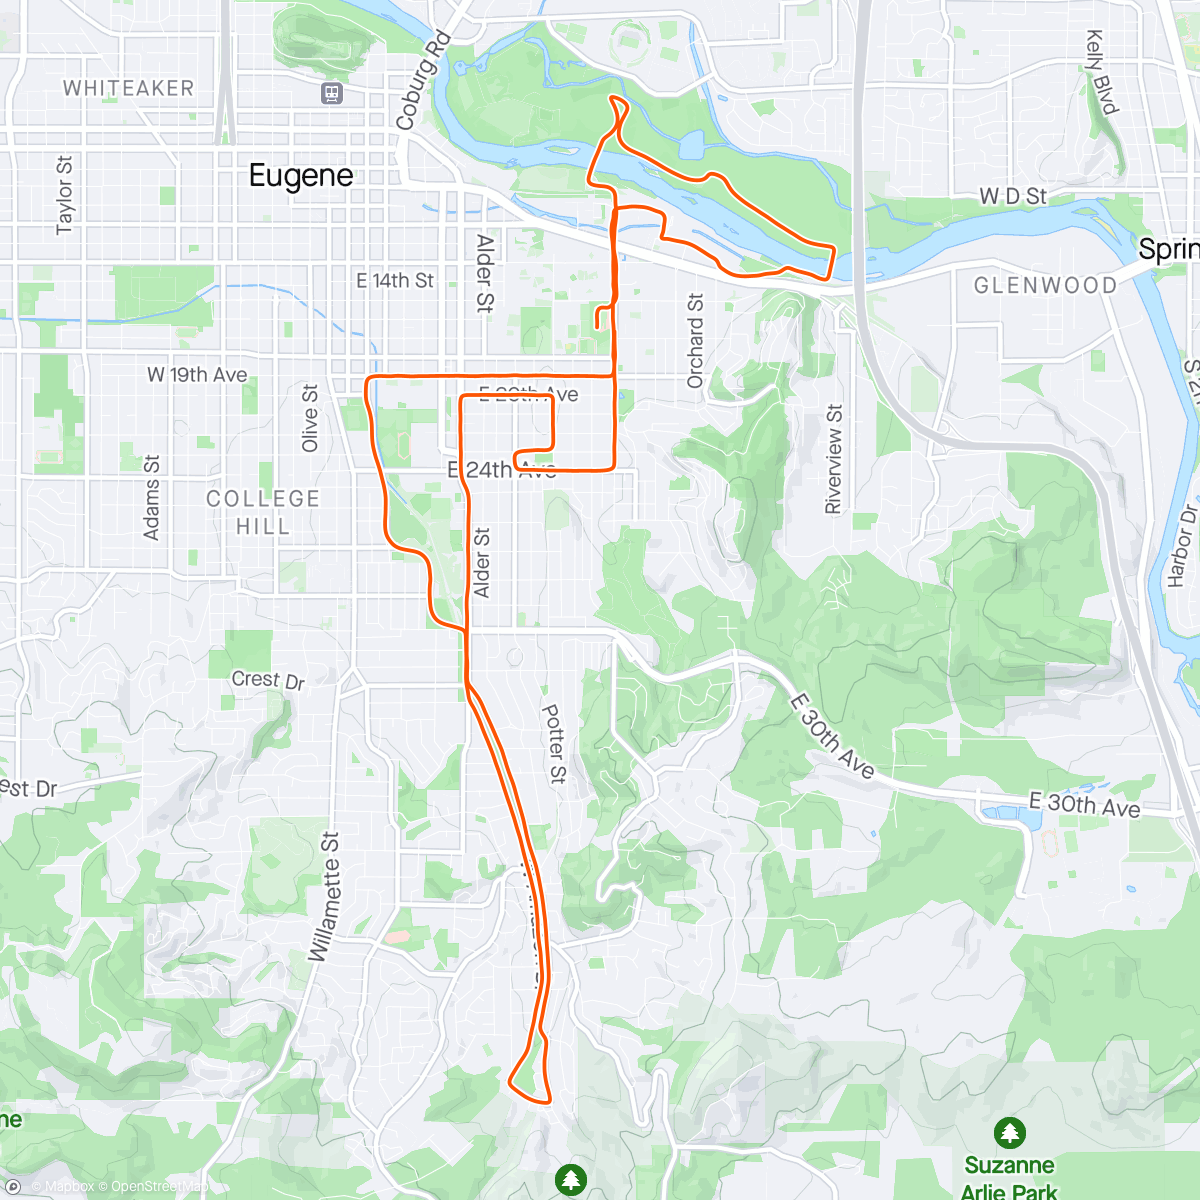 「Eugene Half Marathon - Grateful I can still (mostly) run a half marathon without doing run specific training for it but realizing how much more fun races are when you’re race fit. Next time.」活動的地圖